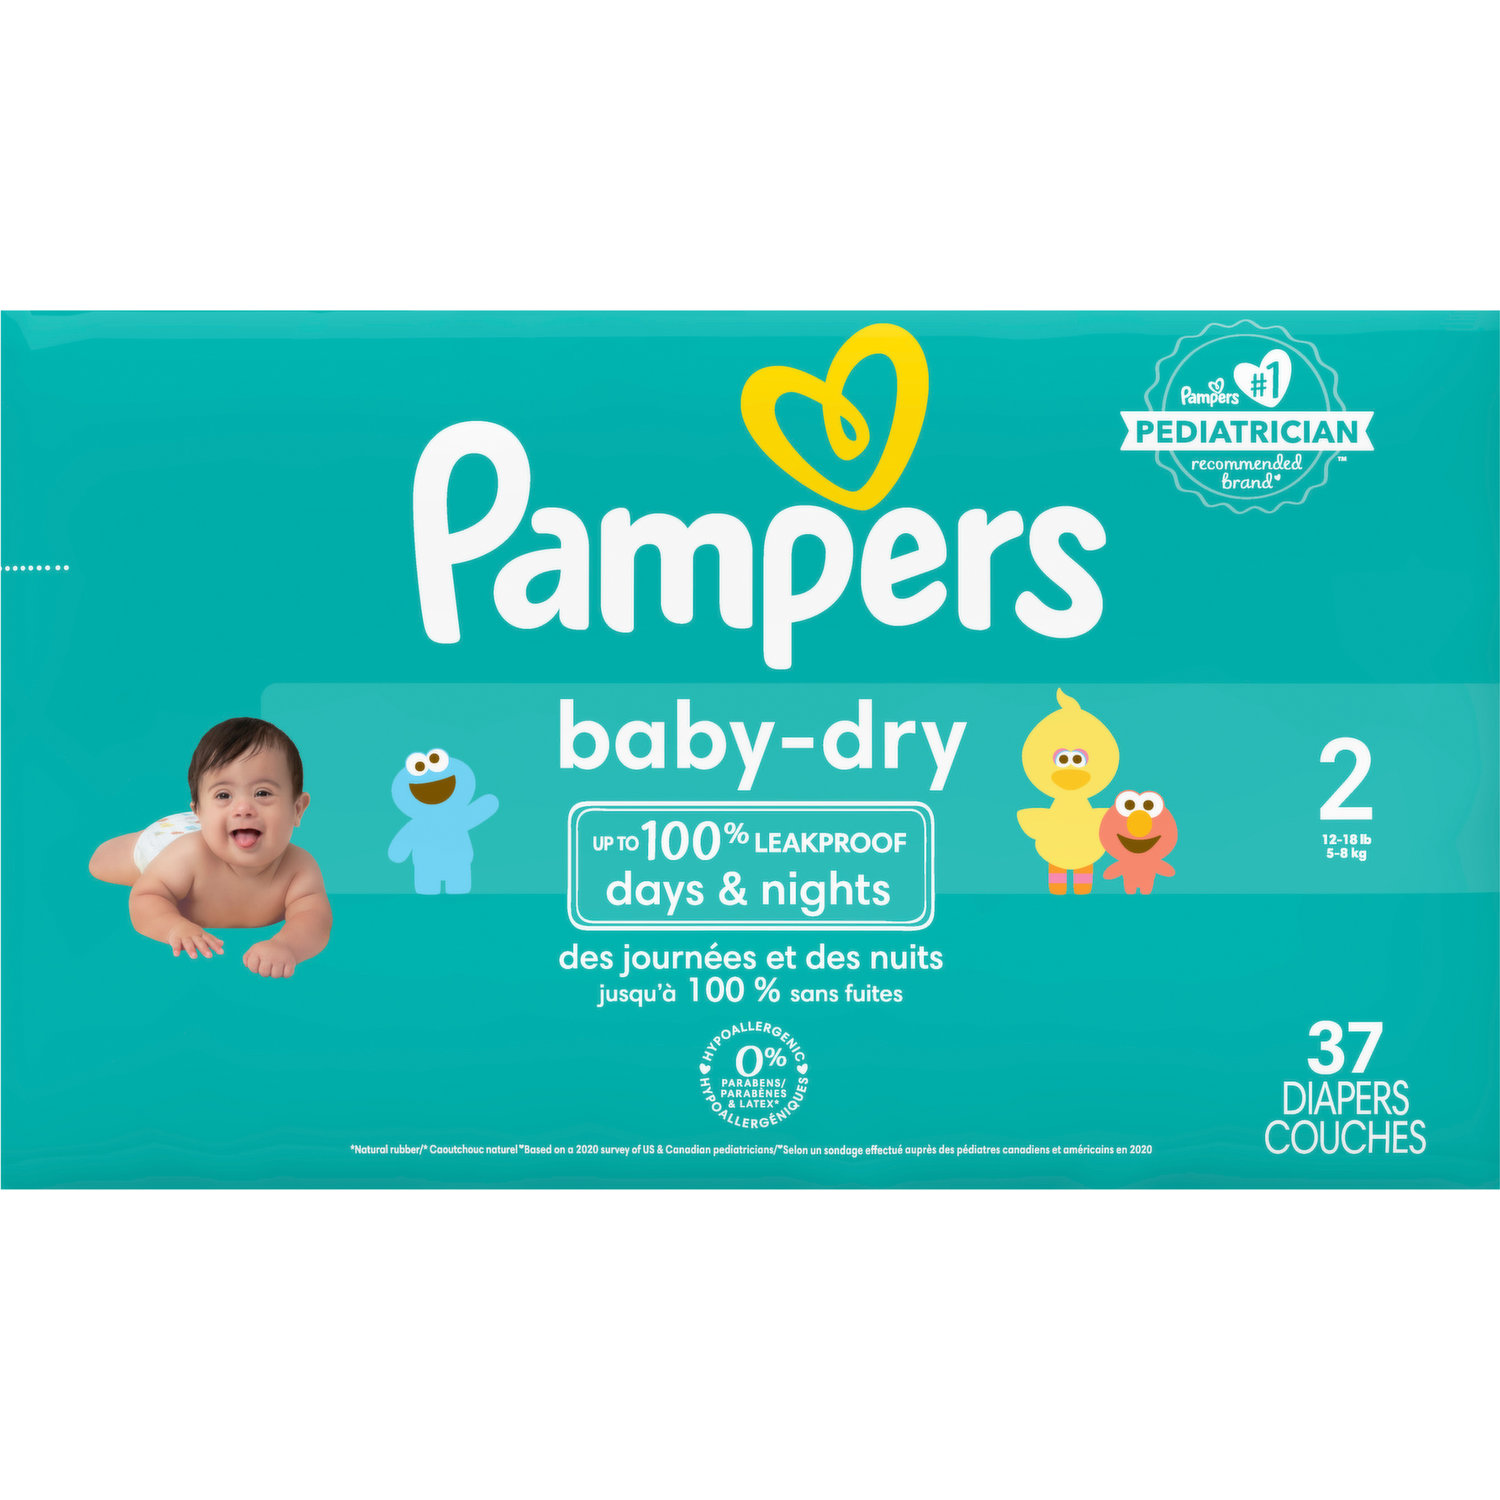 Pampers Boys Easy Ups Training Underwear, 4T-5T , 60 Count - M - Buy 60  Pampers Tape Diapers